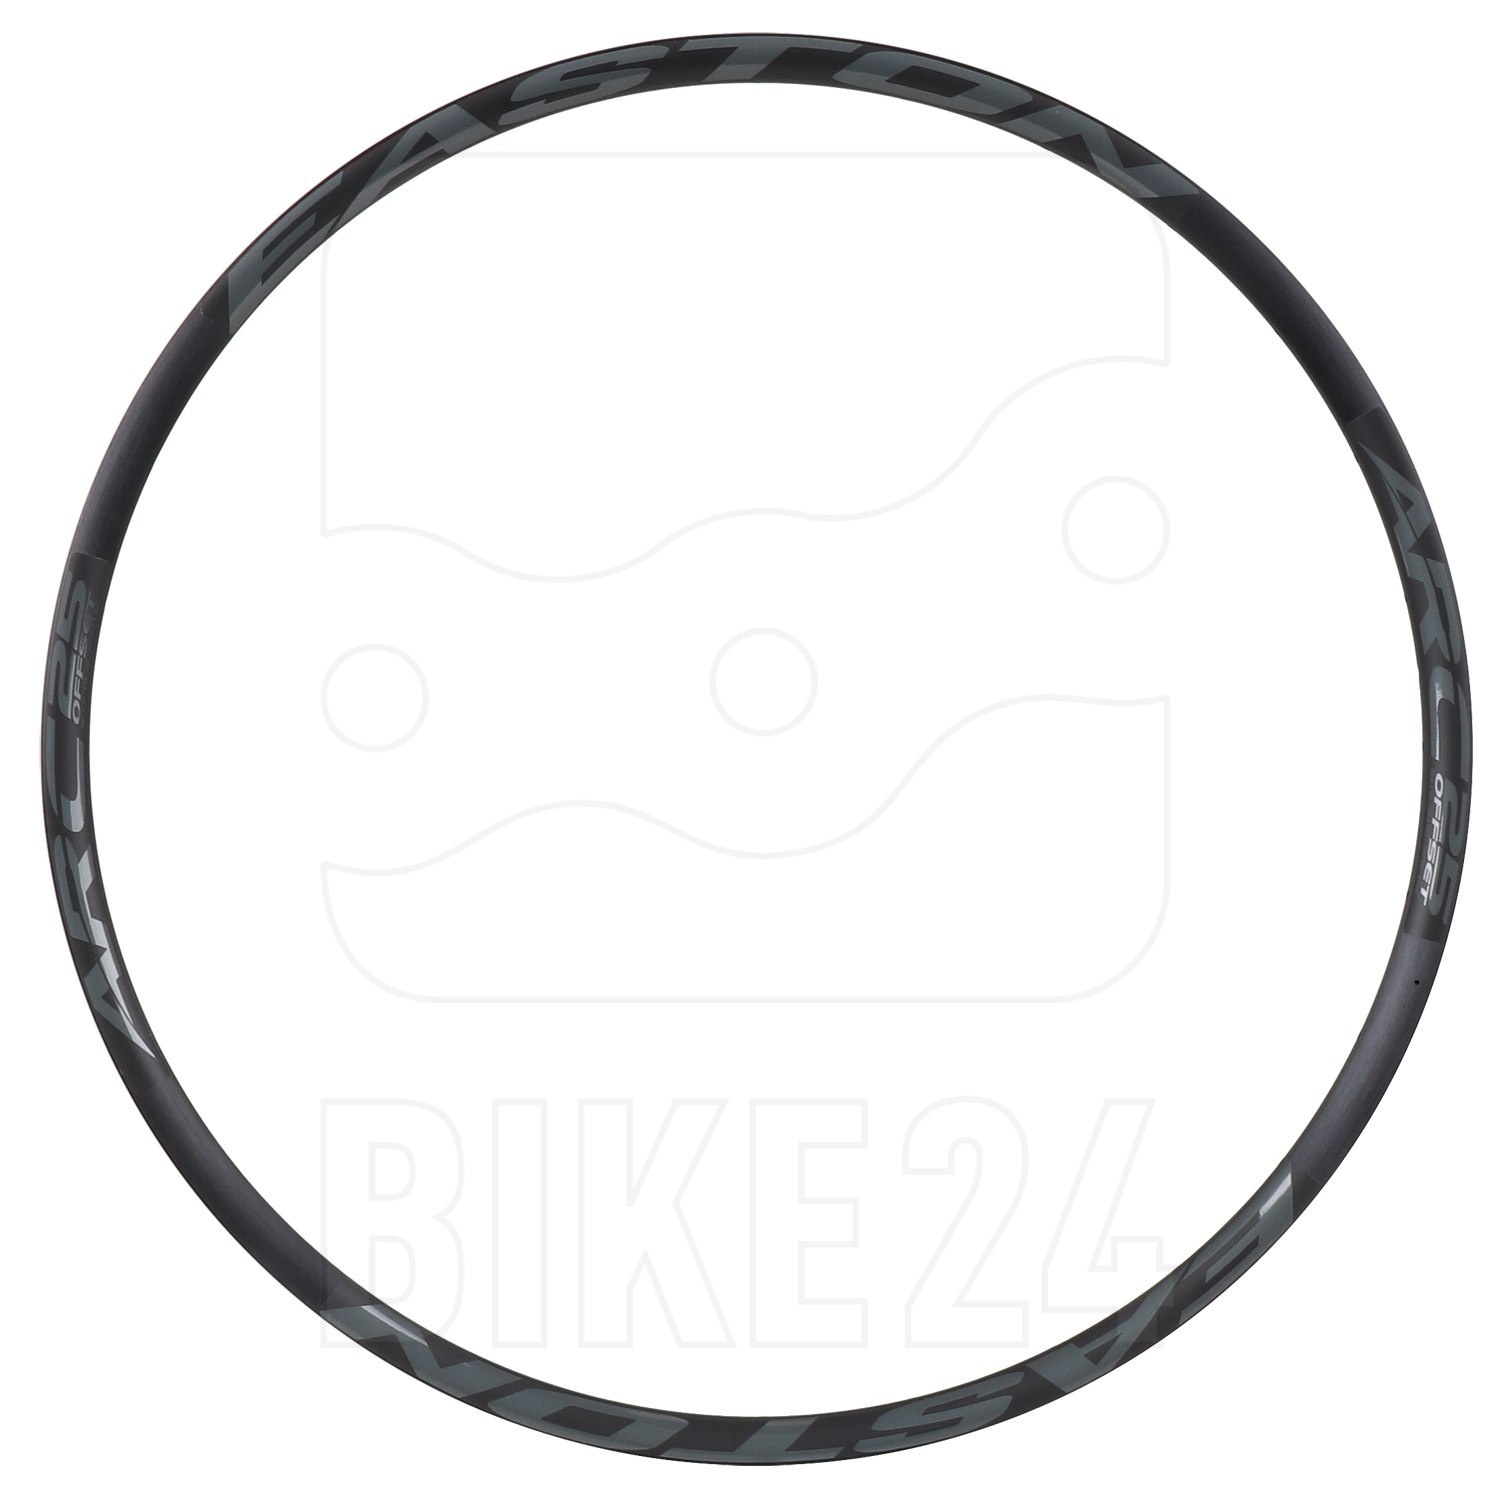 Image of Easton ARC Offset 25 - 27.5 Inches Rim - 28 holes